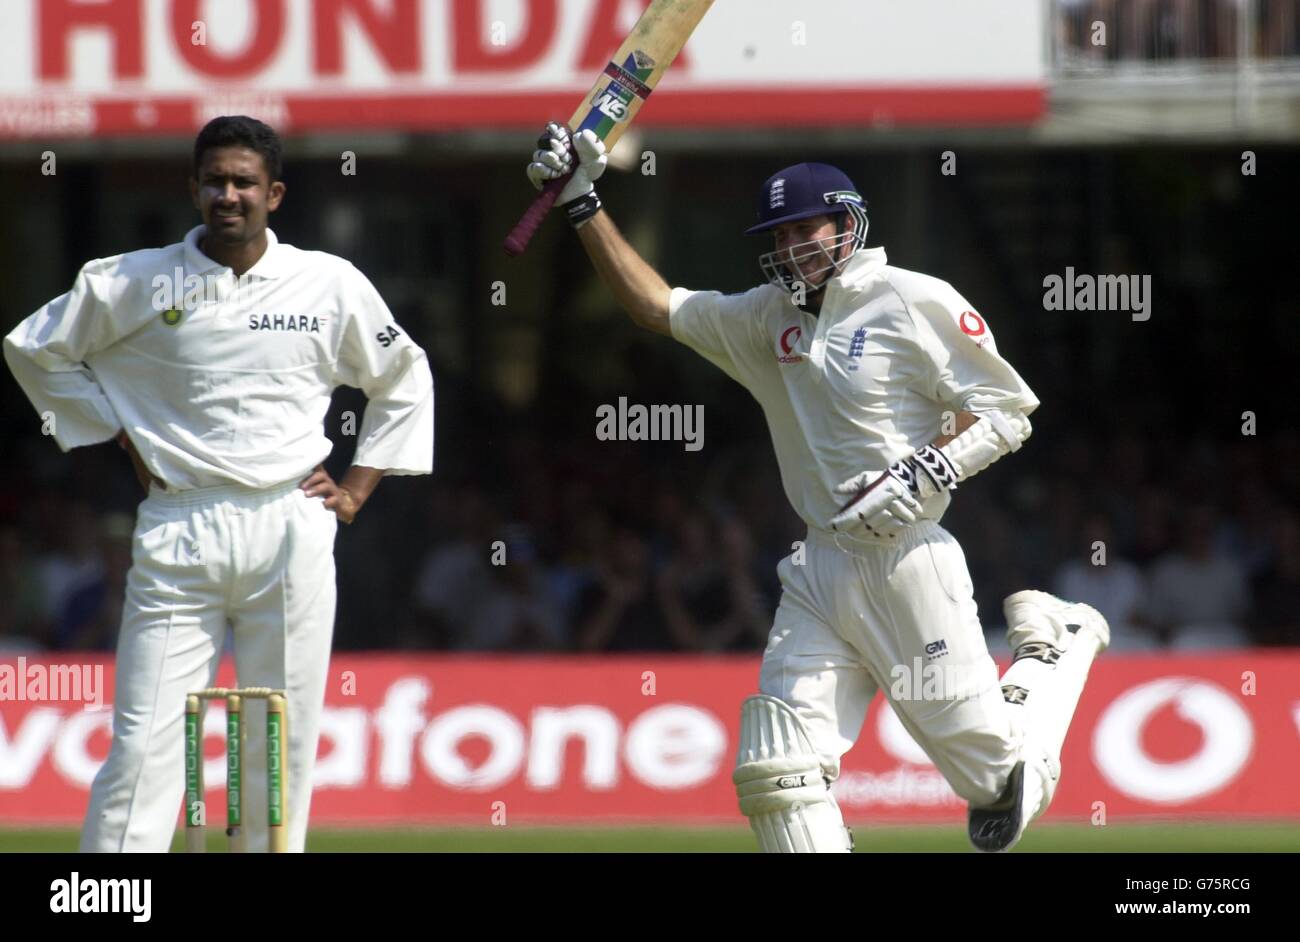 England opener Michael Vaughan celebrates his century as bowler Anil Kumble looks on, during the fourth day of the 1st Test against India at Lord's. Stock Photo